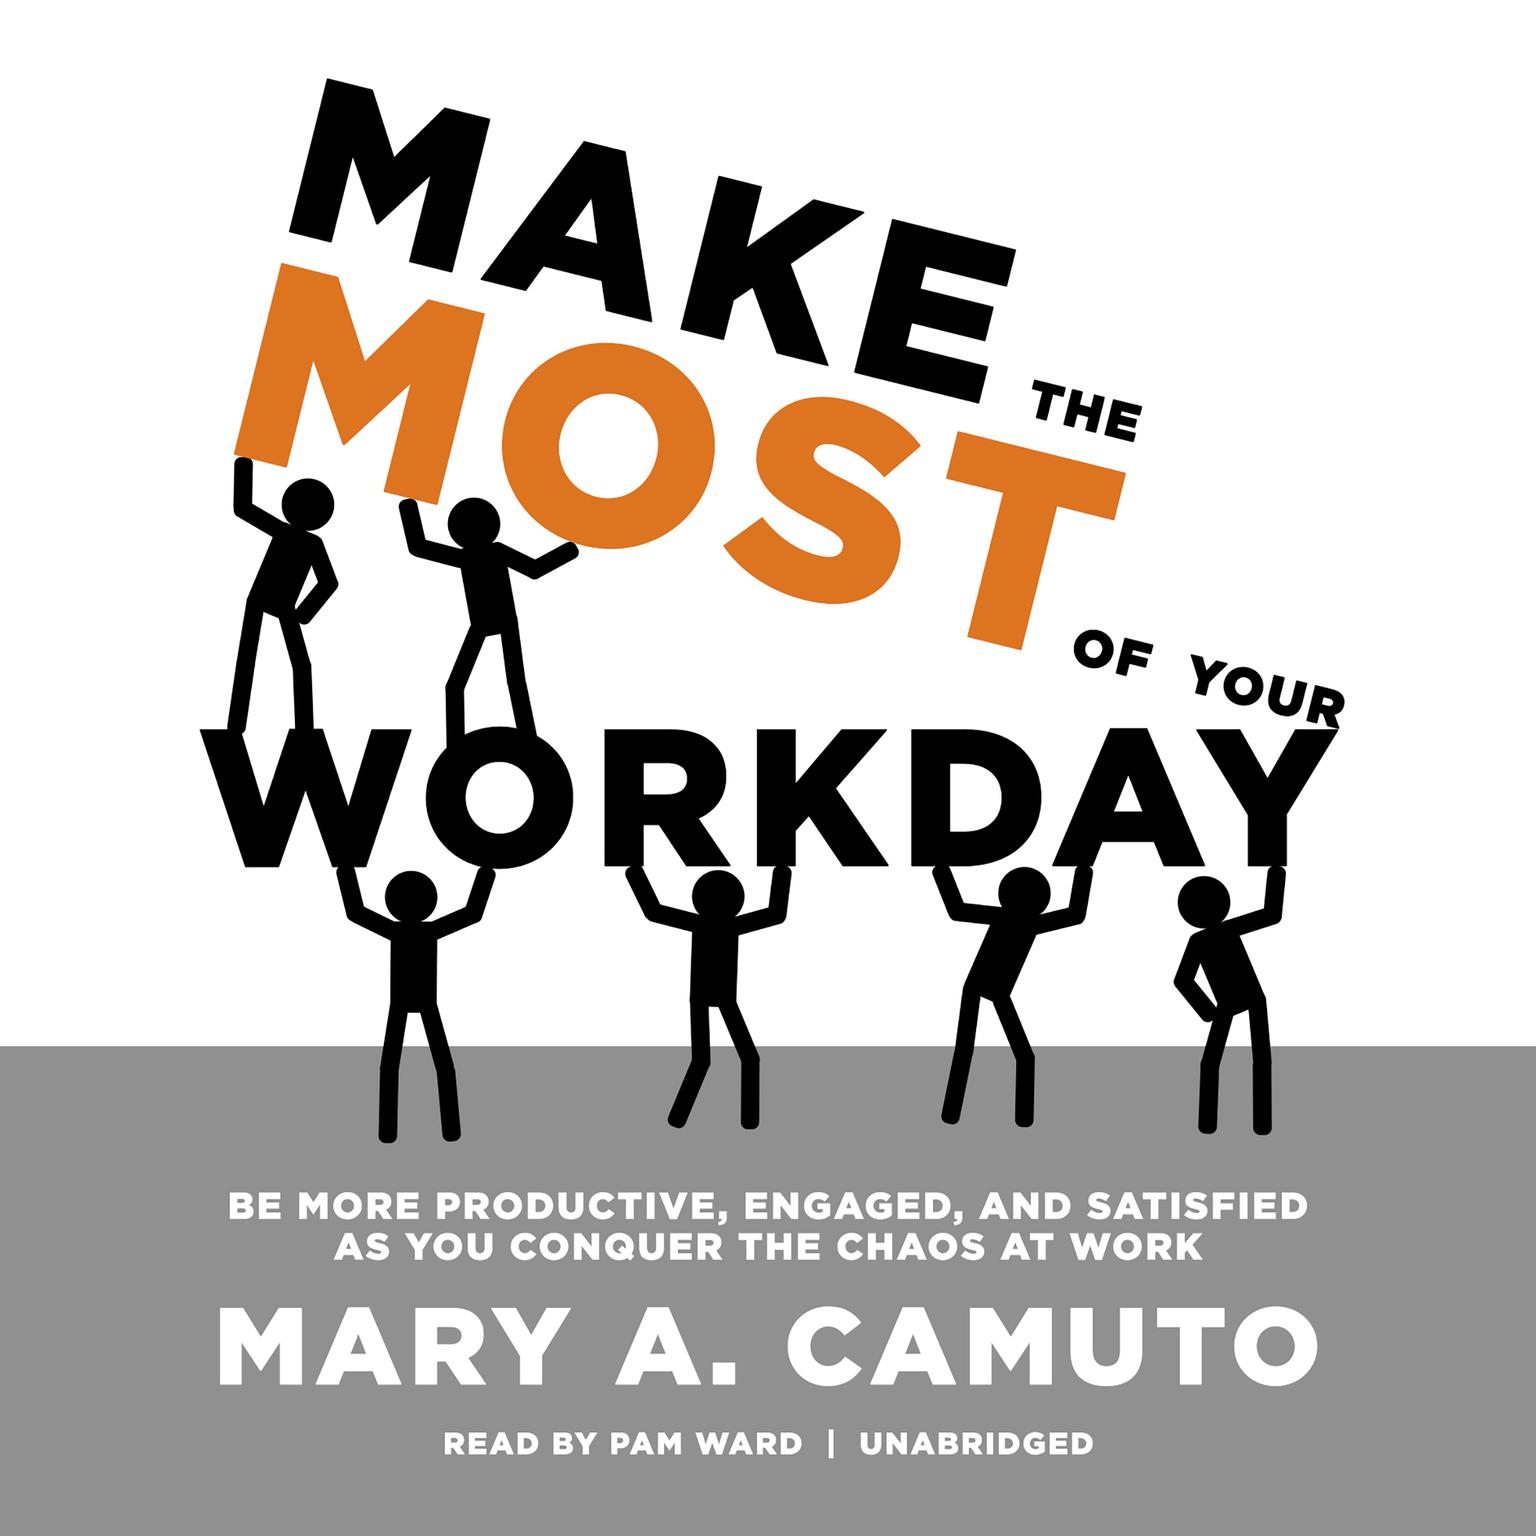 Make the Most of Your Workday: Be More Productive, Engaged, and Satisfied as You Conquer the Chaos at Work          Audiobook, by Mary A. Camuto